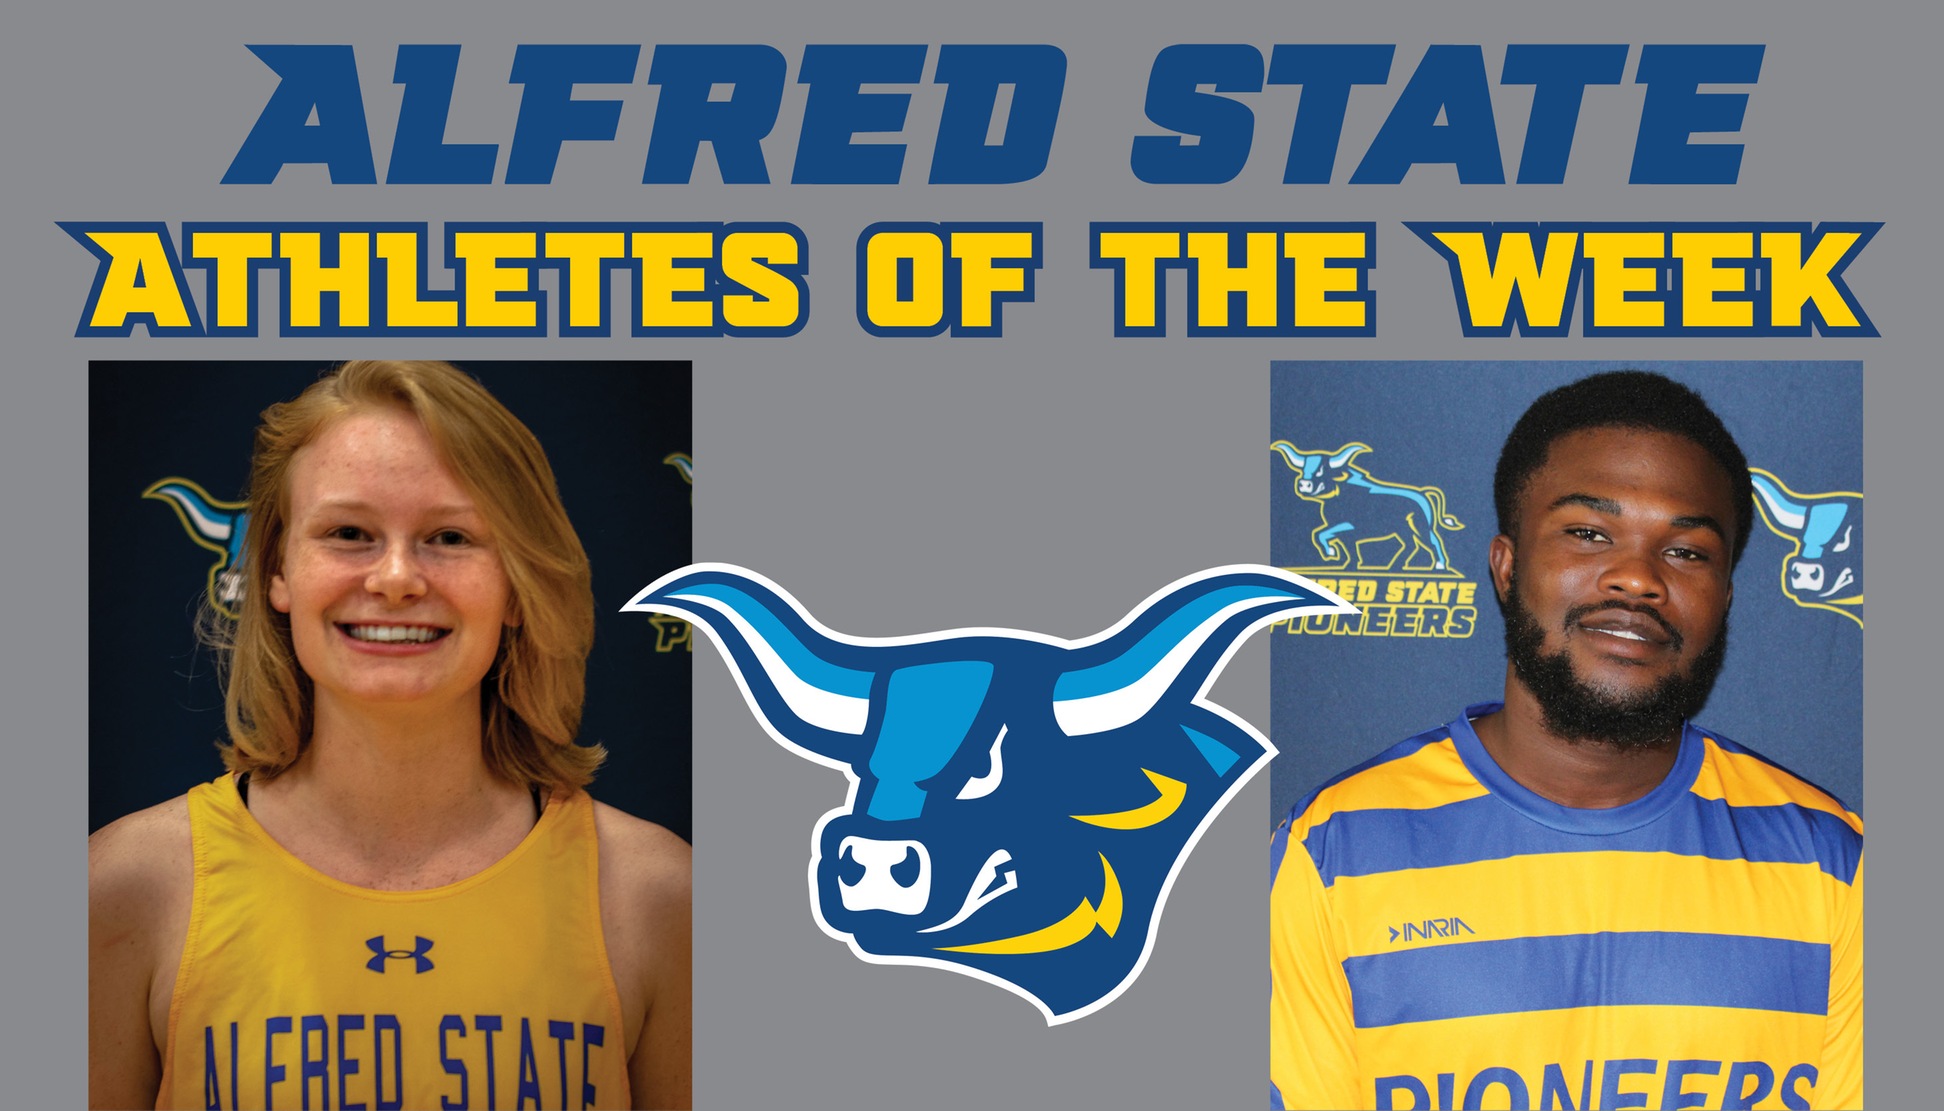 Russell and Senyah named athletes of the week